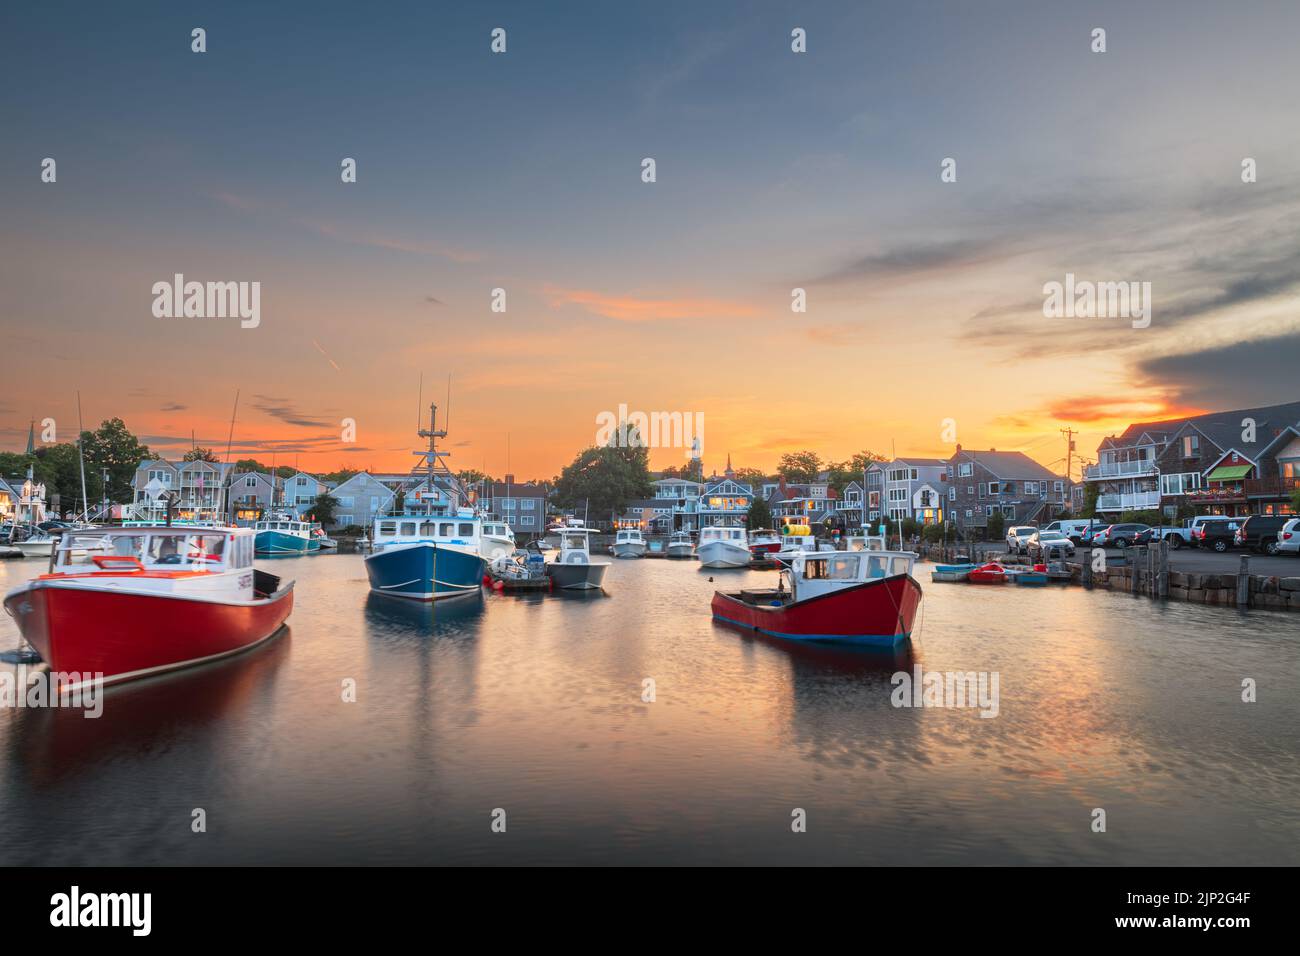 Rockport, Massachusetts, USA downtown and harbor view at dusk. Stock Photo